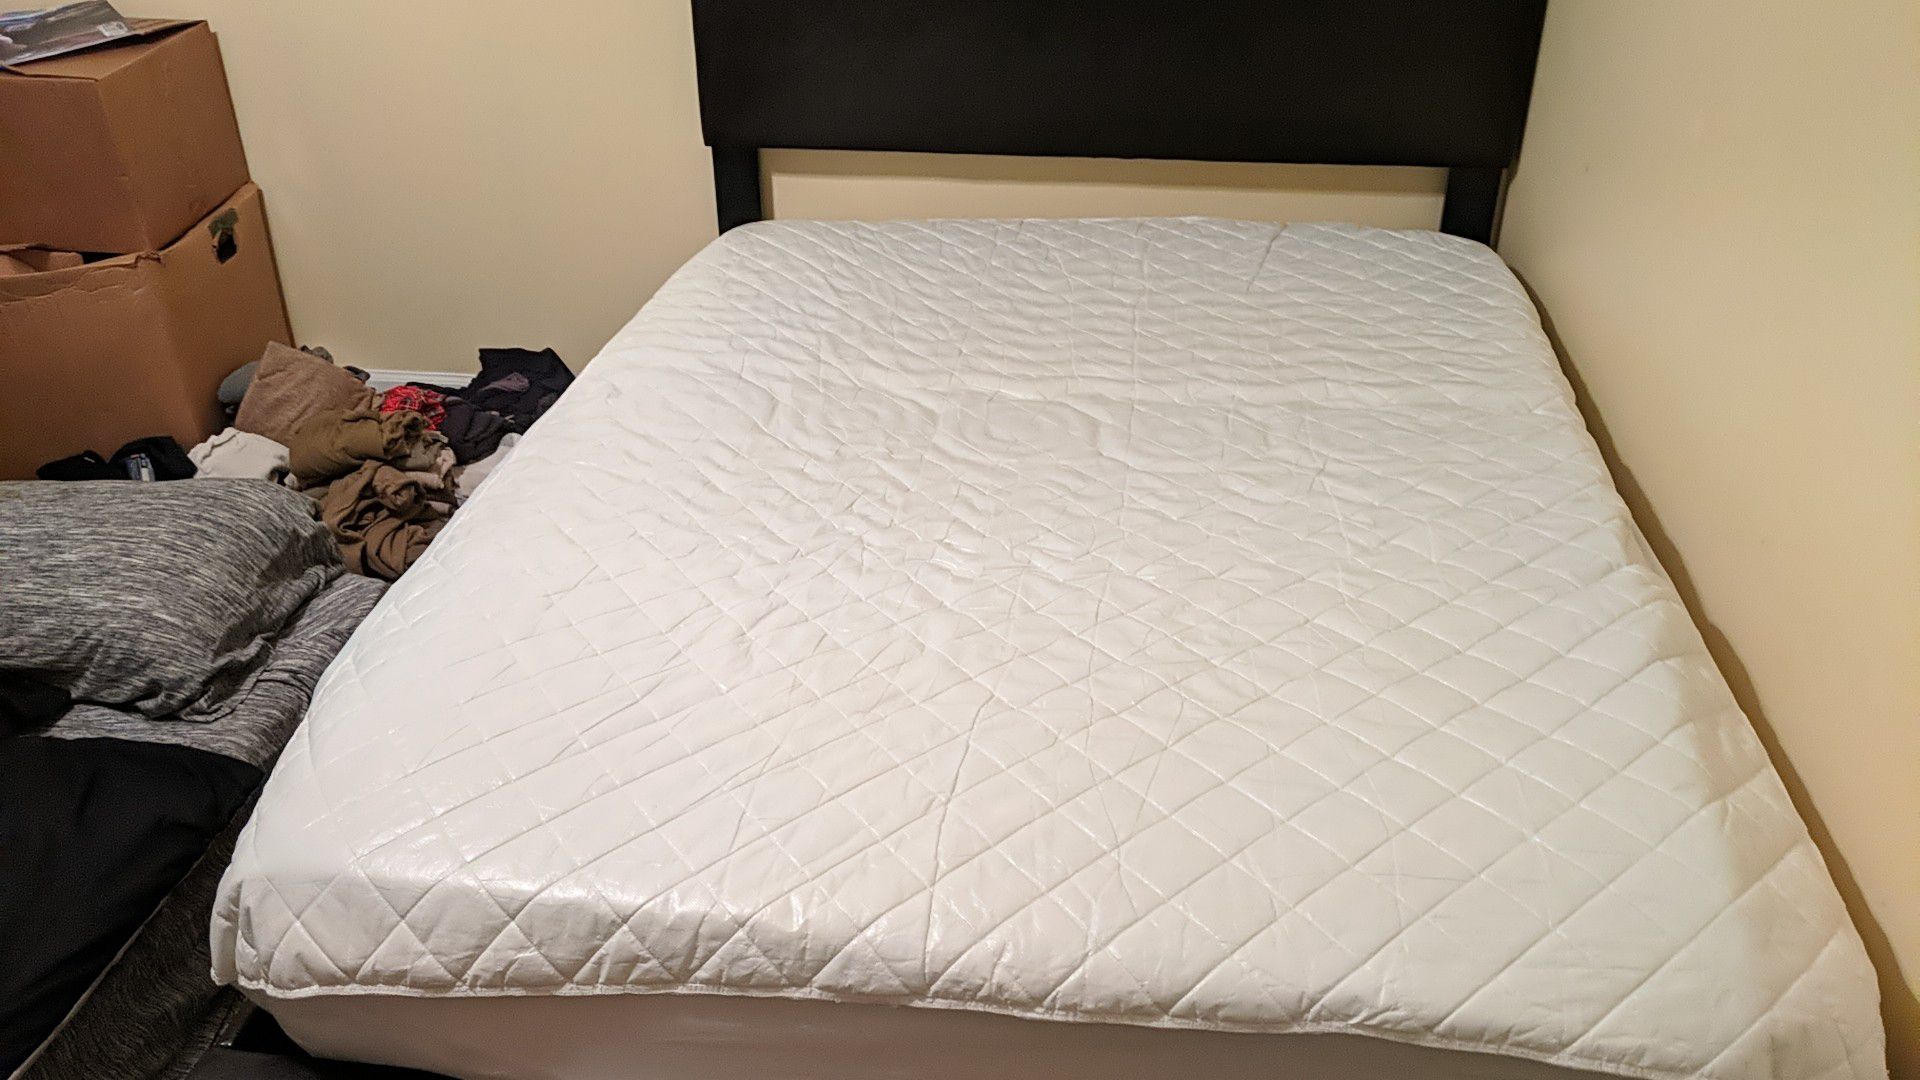 Full size mattress for sale with frame